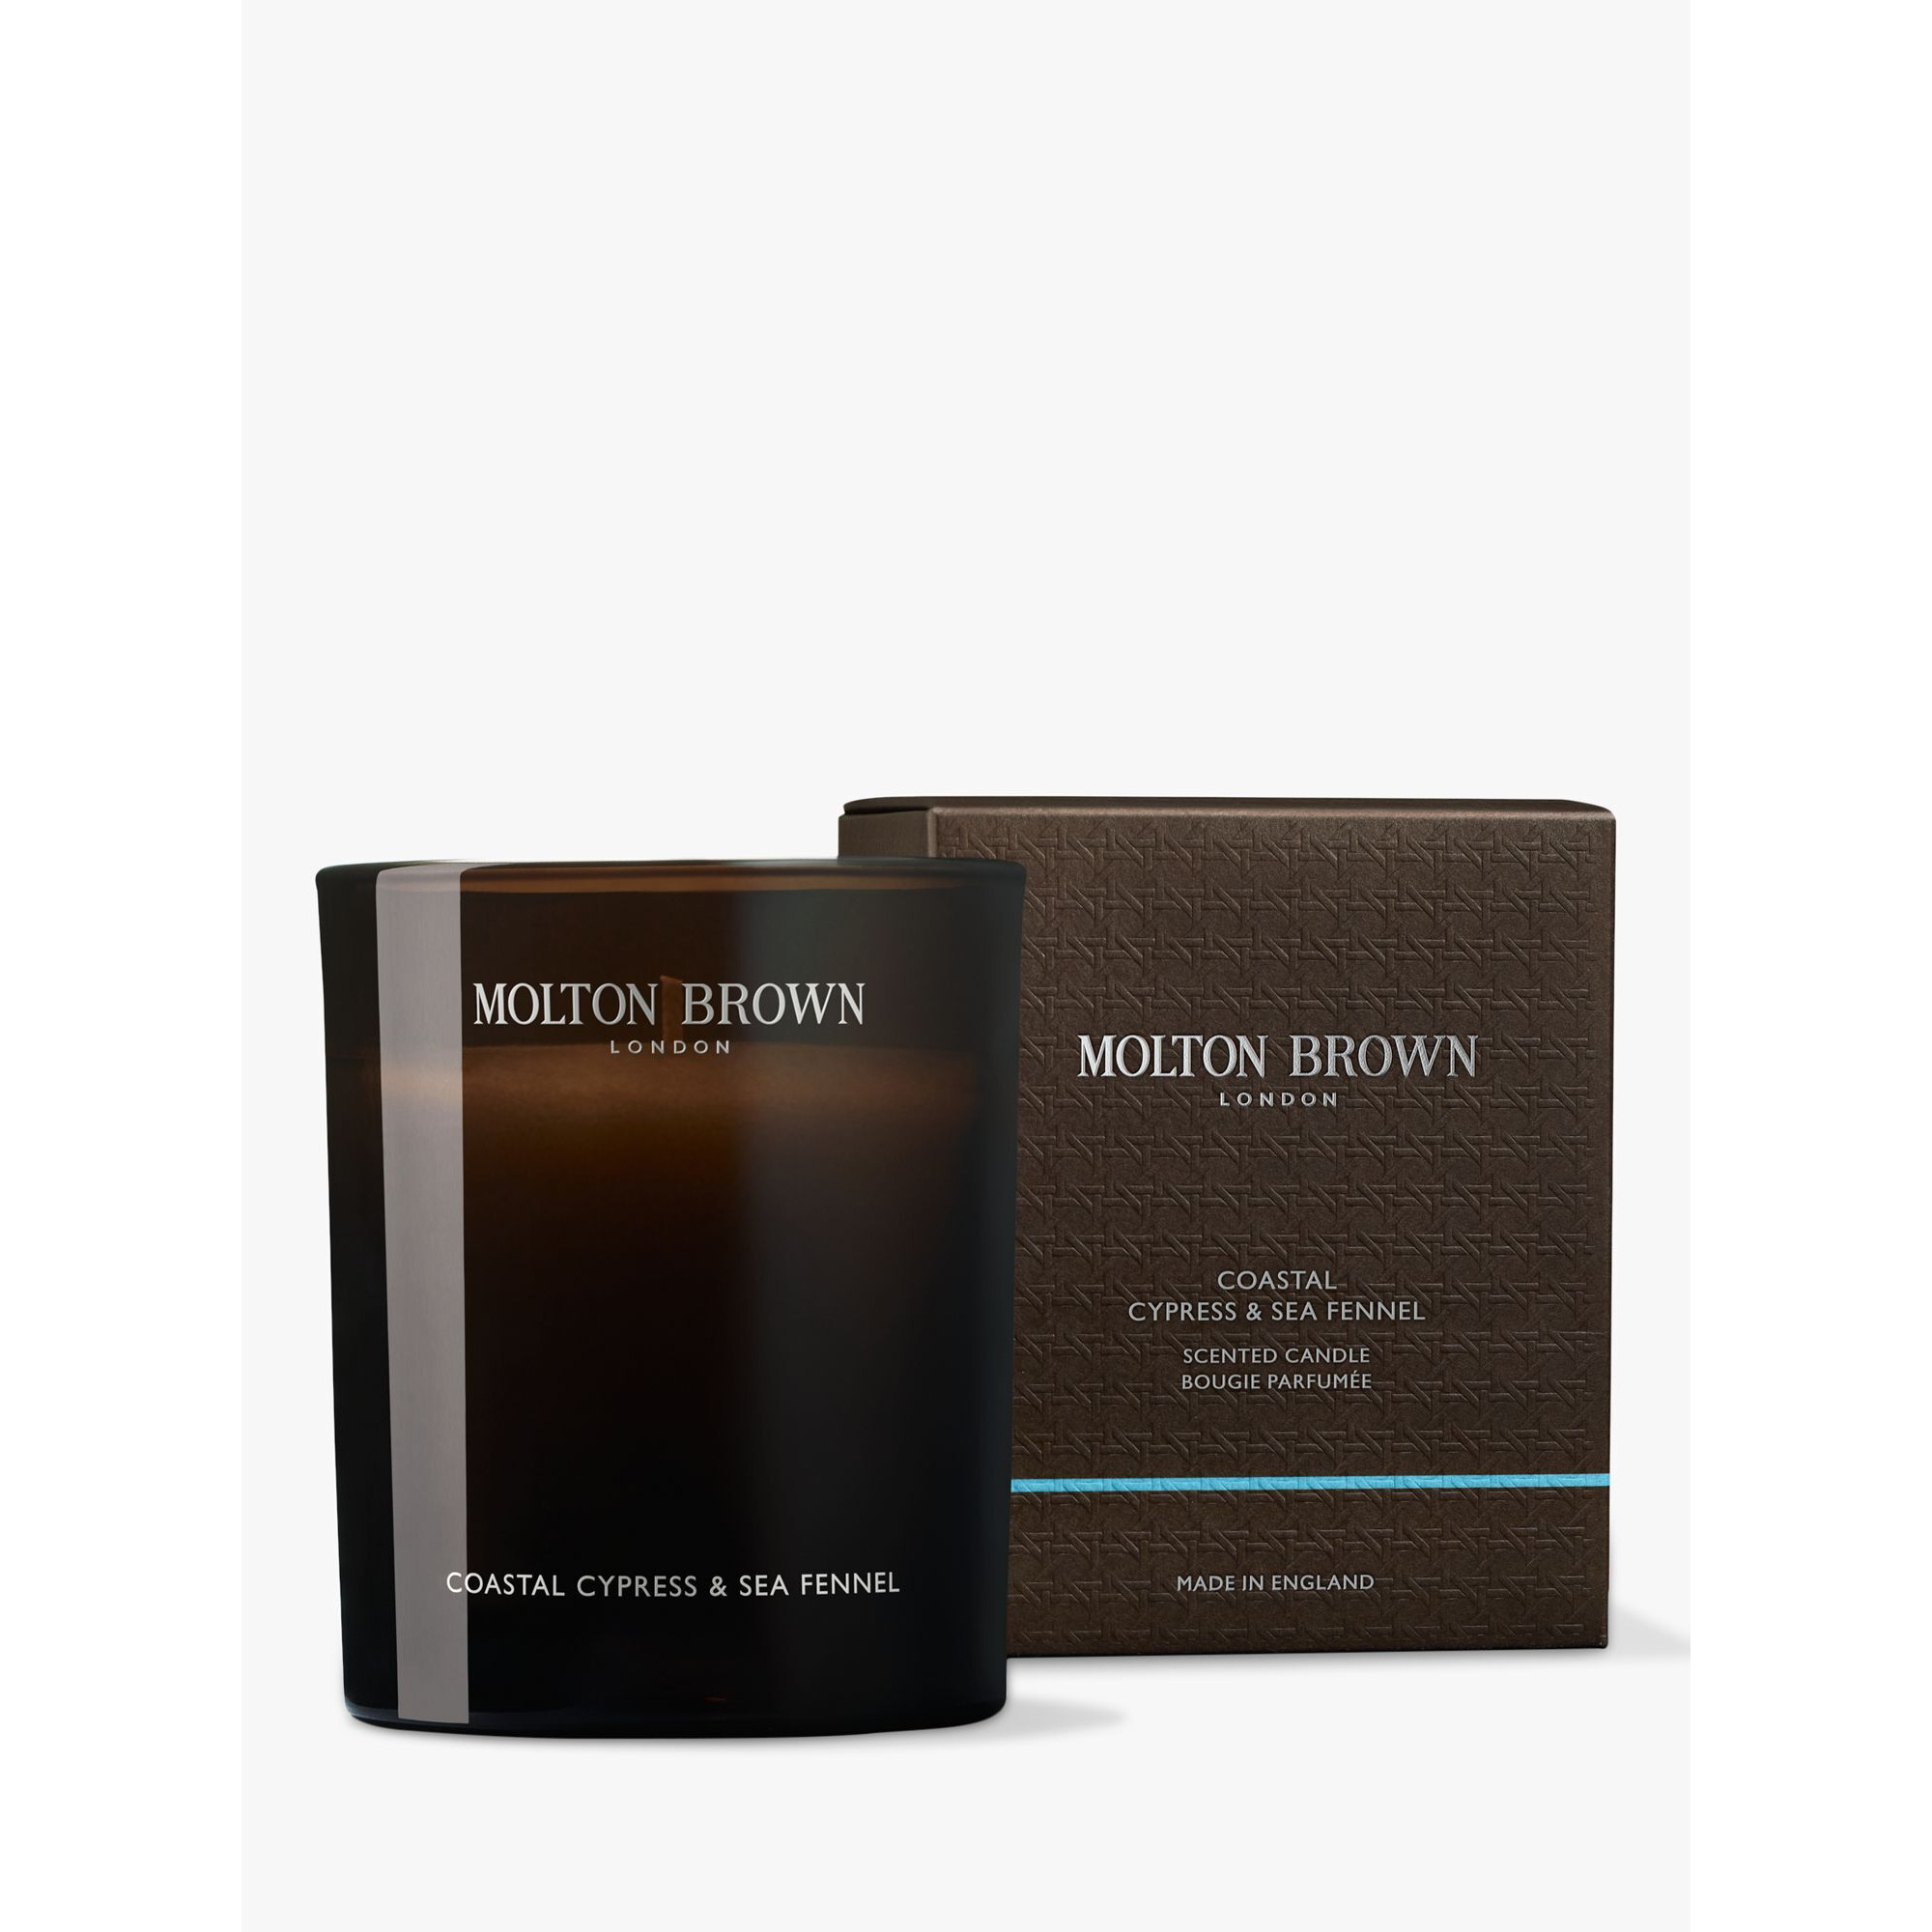 Molton Brown Coastal Cypress and Sea Fennel Scented Signature Candle, 190g - image 1